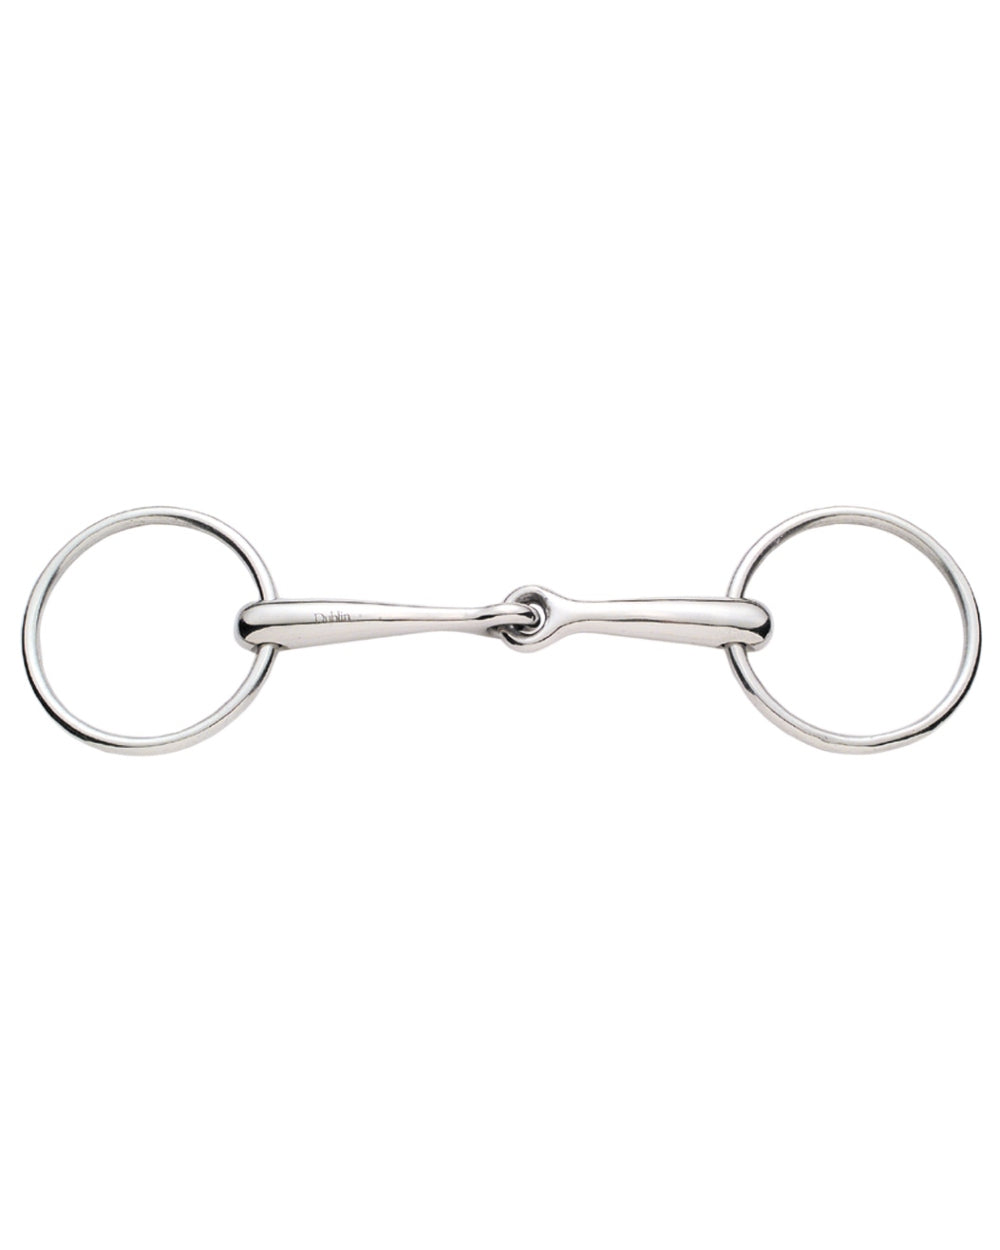 Korsteel Stainless Steel Solid Mouth Jointed 16Mm Loose Ring Snaffle Bit on white background 